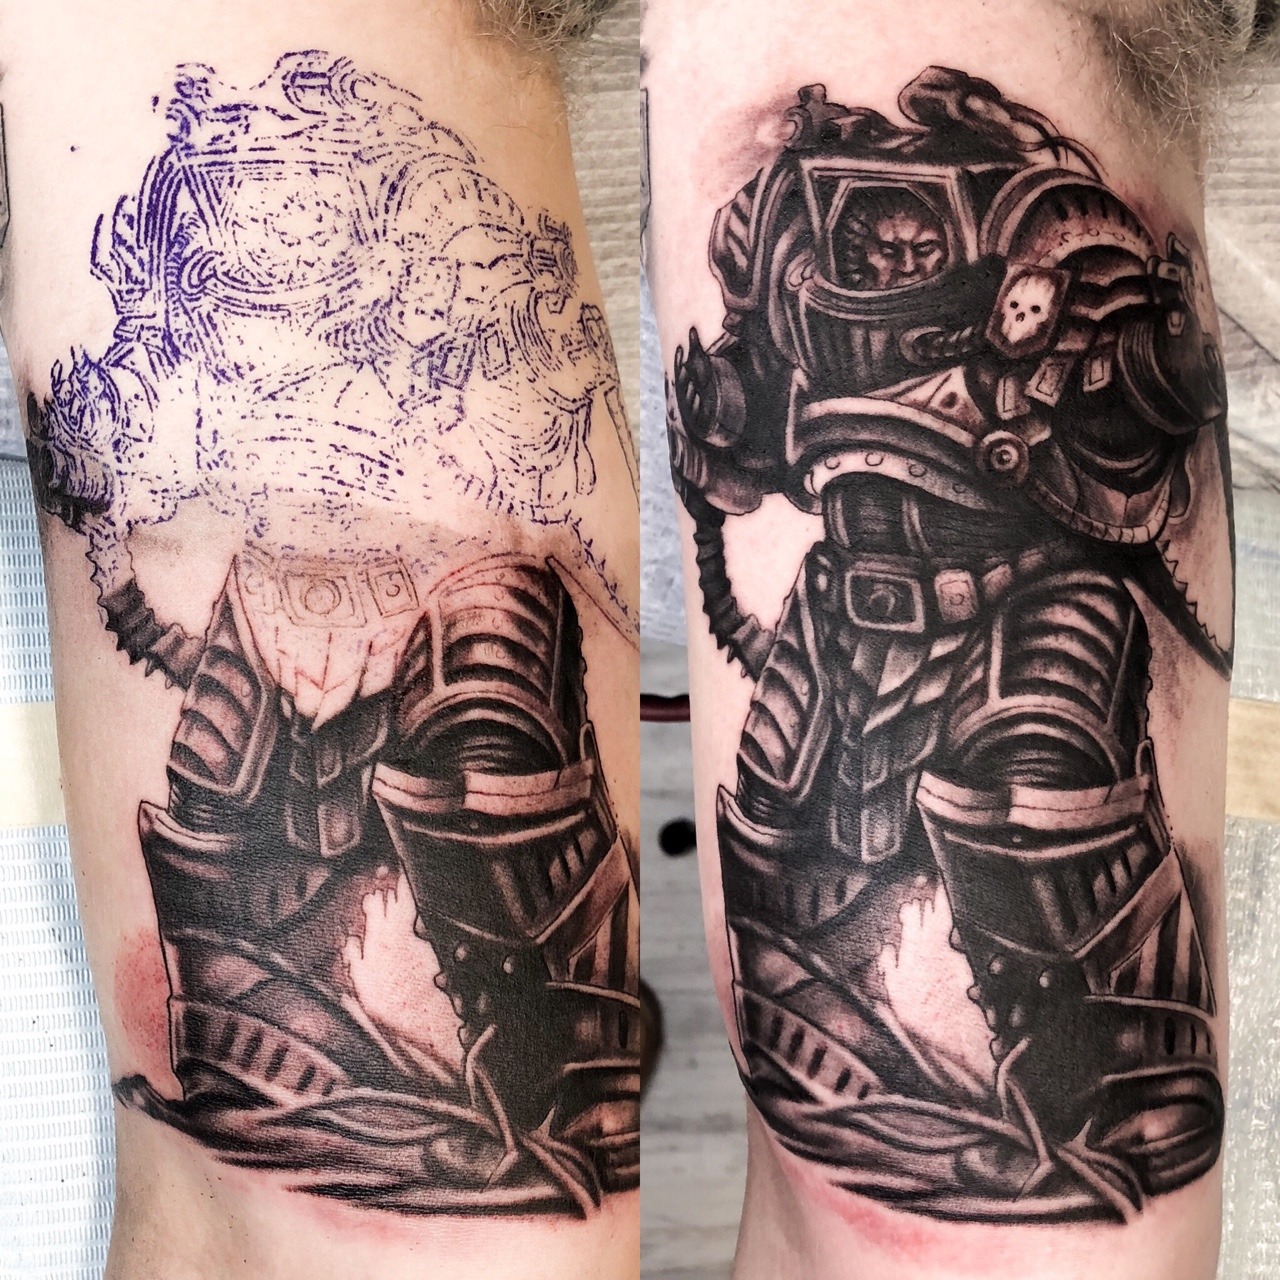 Warhammer 40k tattoo   AMICUS AEDES   The Bolter and Chainsword